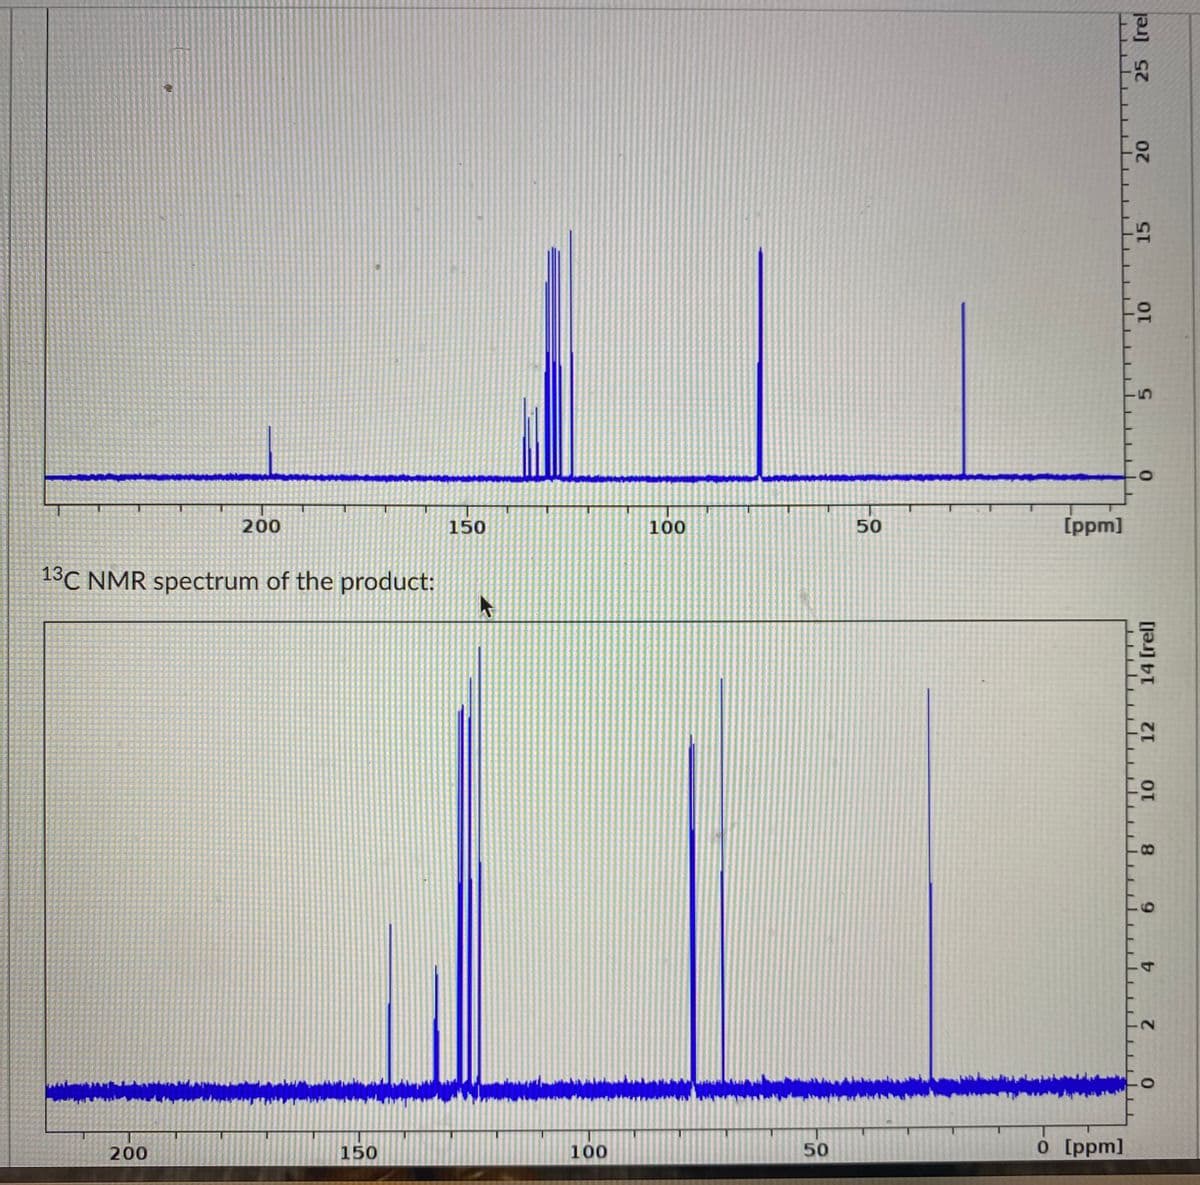 200
13C NMR spectrum of the product:
200
150
150
100
100
50
50
[ppm]
0 [ppm]
F
25 [rel
20
15
10
G
0
14 [rel]
12
ОТ
8
9
4
2
0